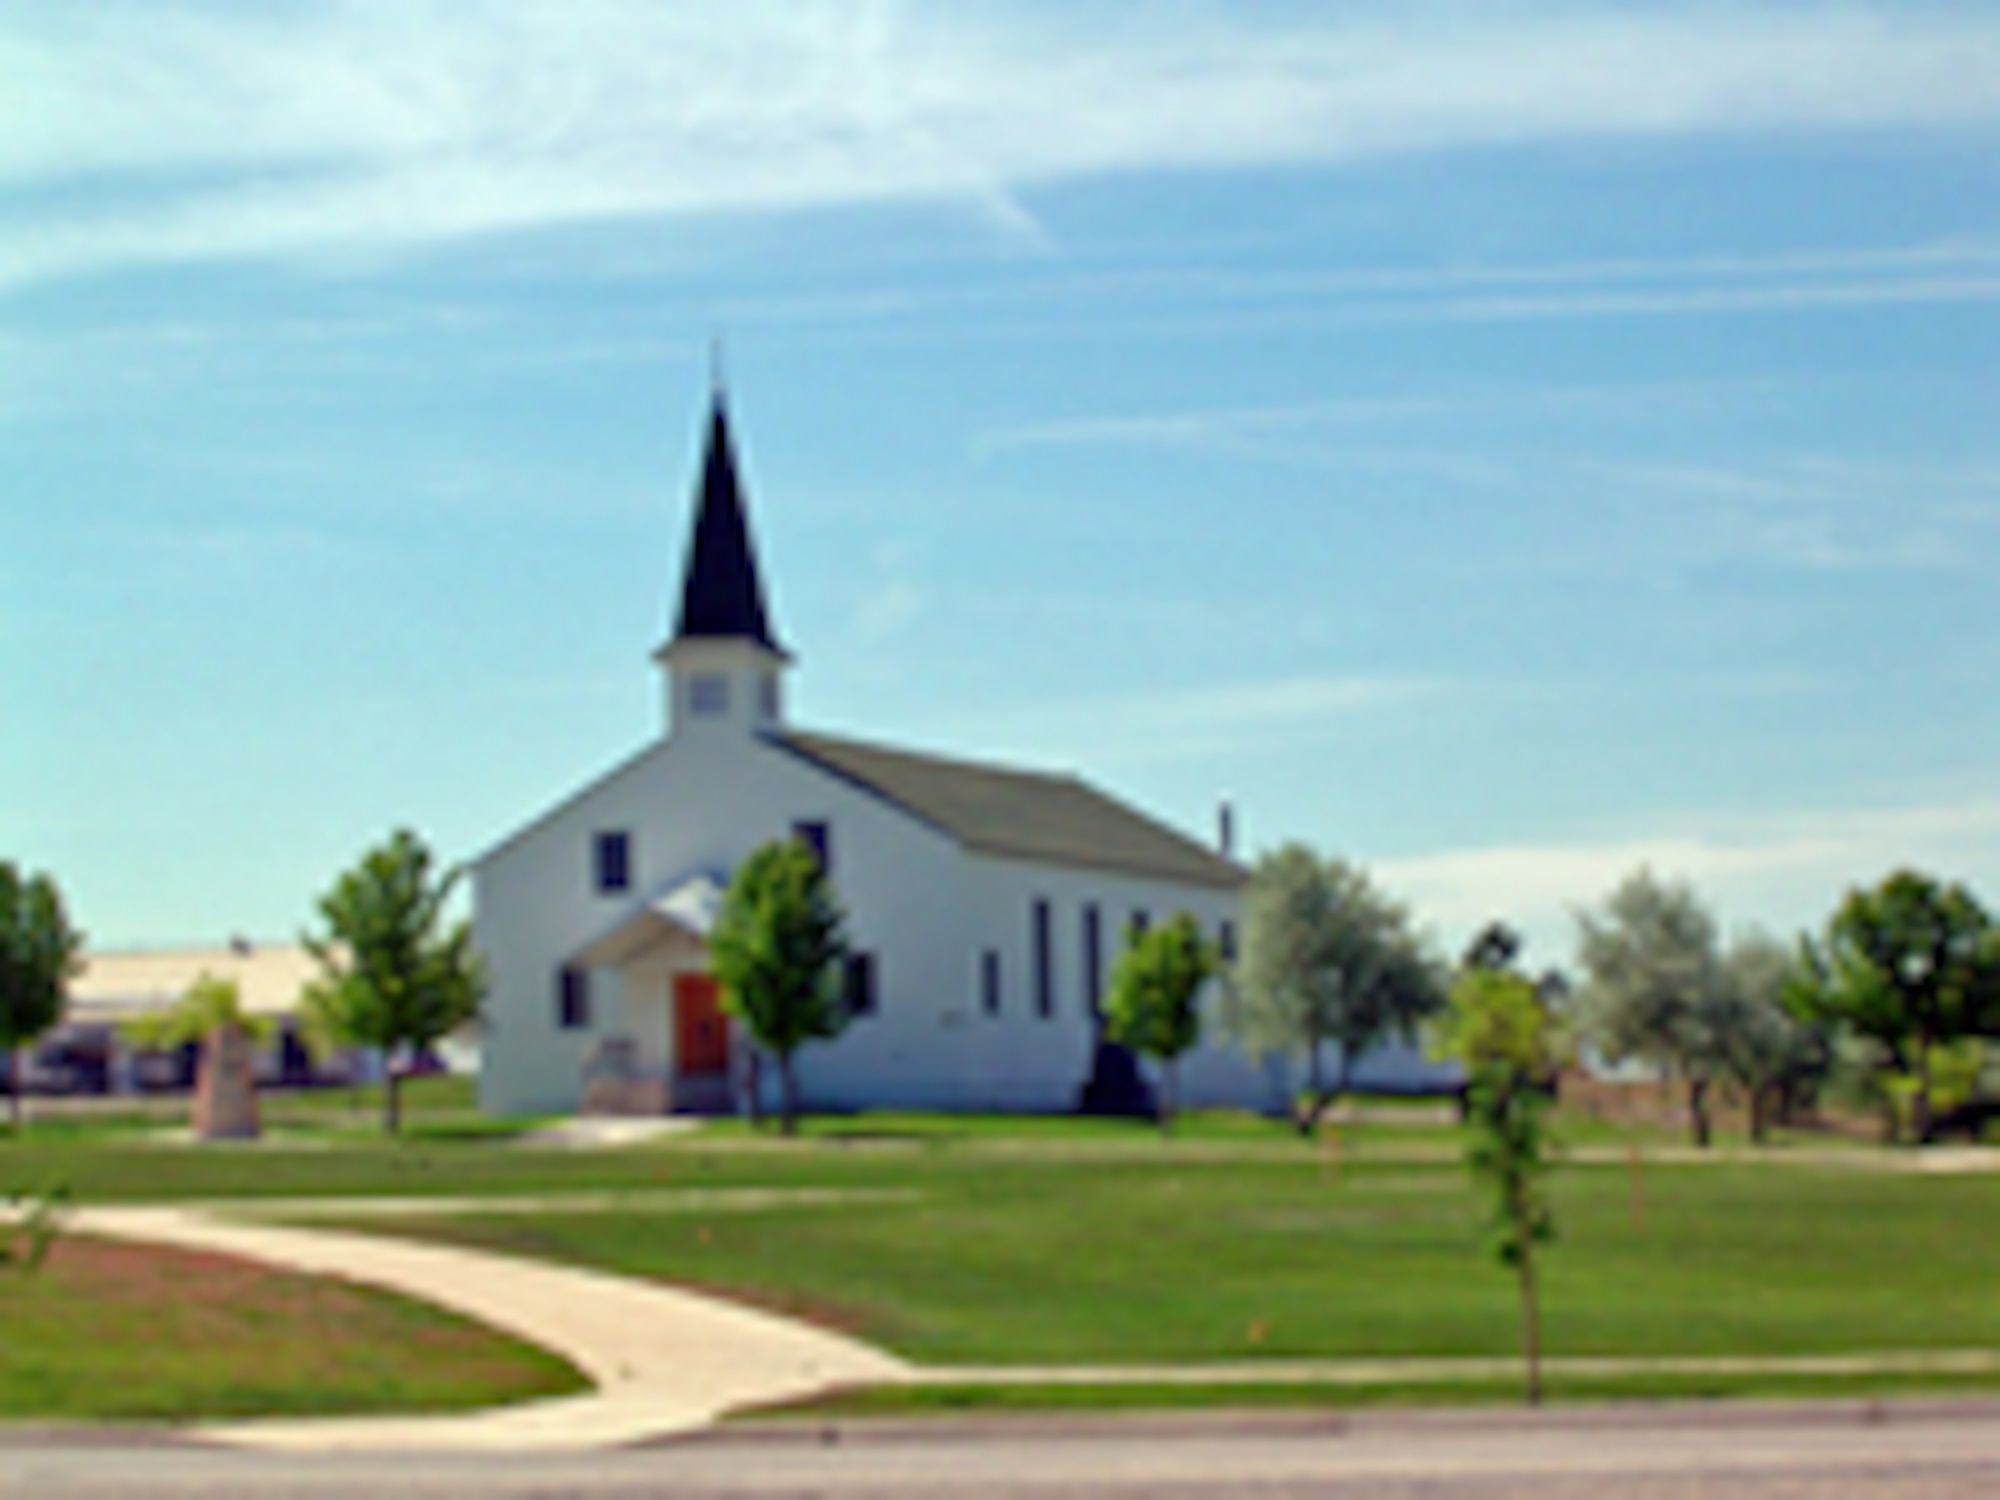 Overlooking the northwest entrance to Hill Air Force Base, the original base chapel building is the centerpiece of Hill Aerospace Museum's Memorial Park. This beautiful Chapel and surrounding park are dedicated to the memory of the men and women of the United States military who served our country in war and in peacetime, at Hill Air Force Base and elsewhere around the world